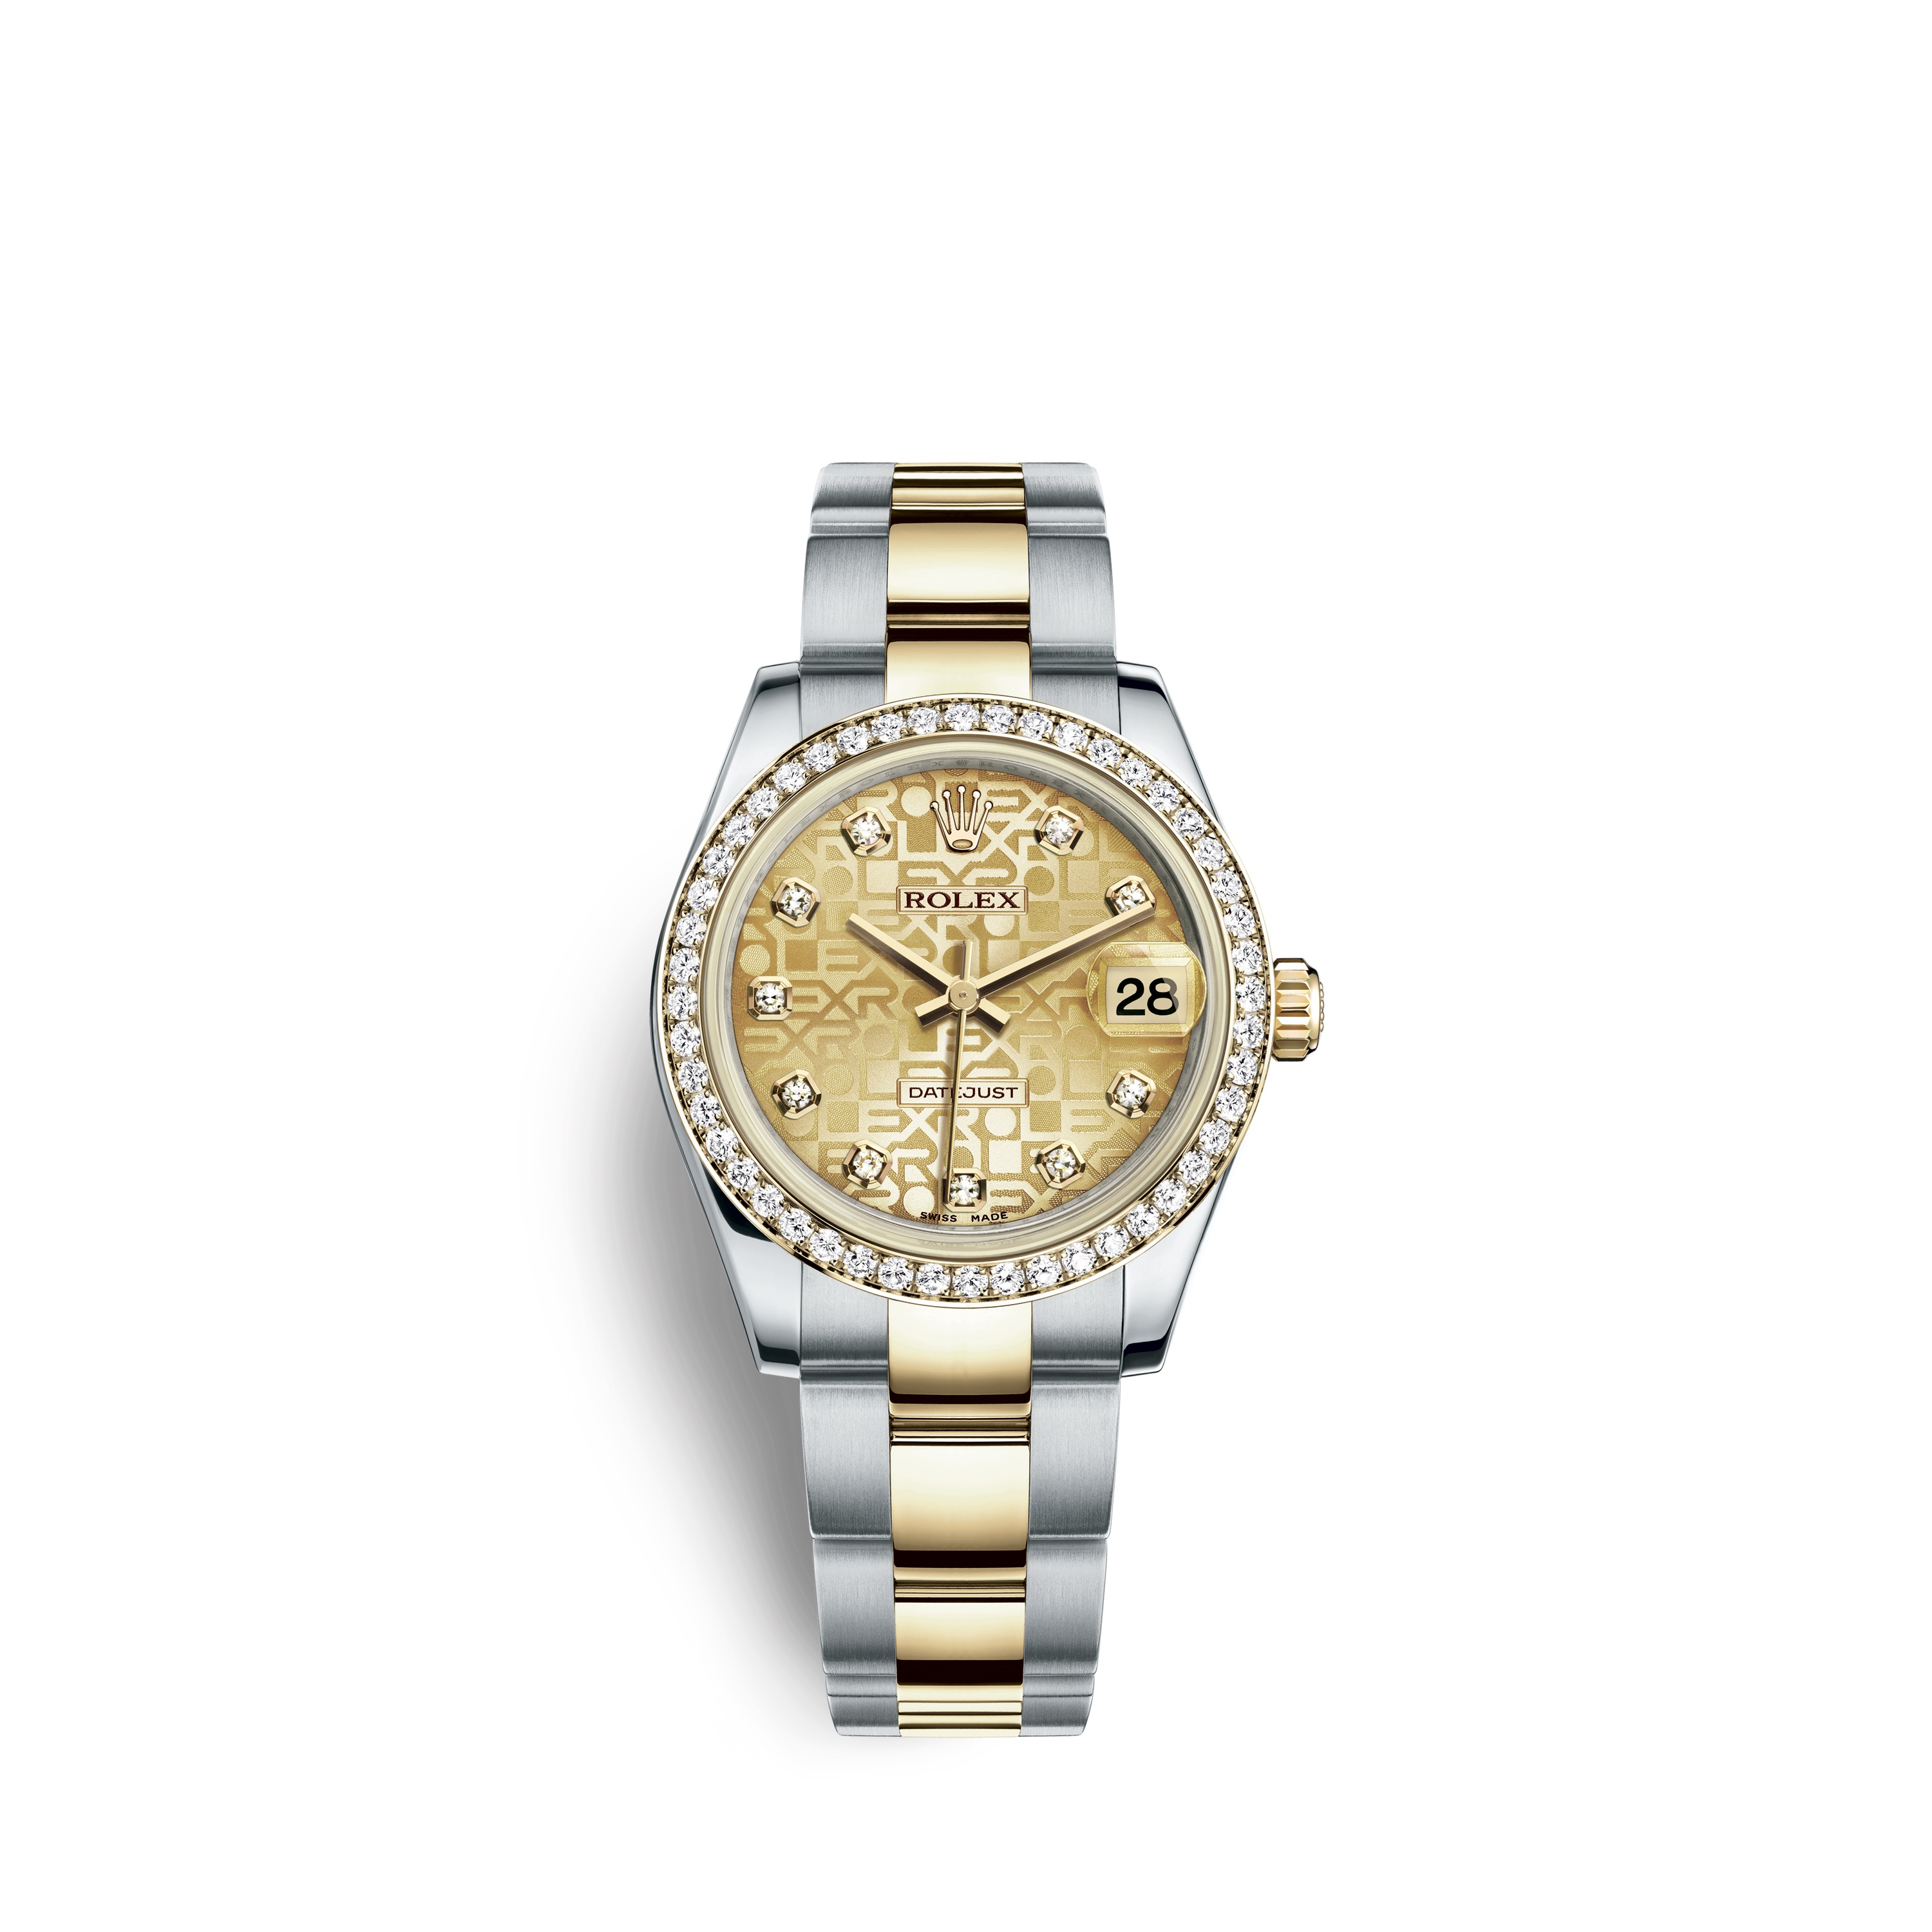 Datejust 31 178383 Gold and Stainless Steel Watch (Champagne Jubilee Design Set with Diamonds)